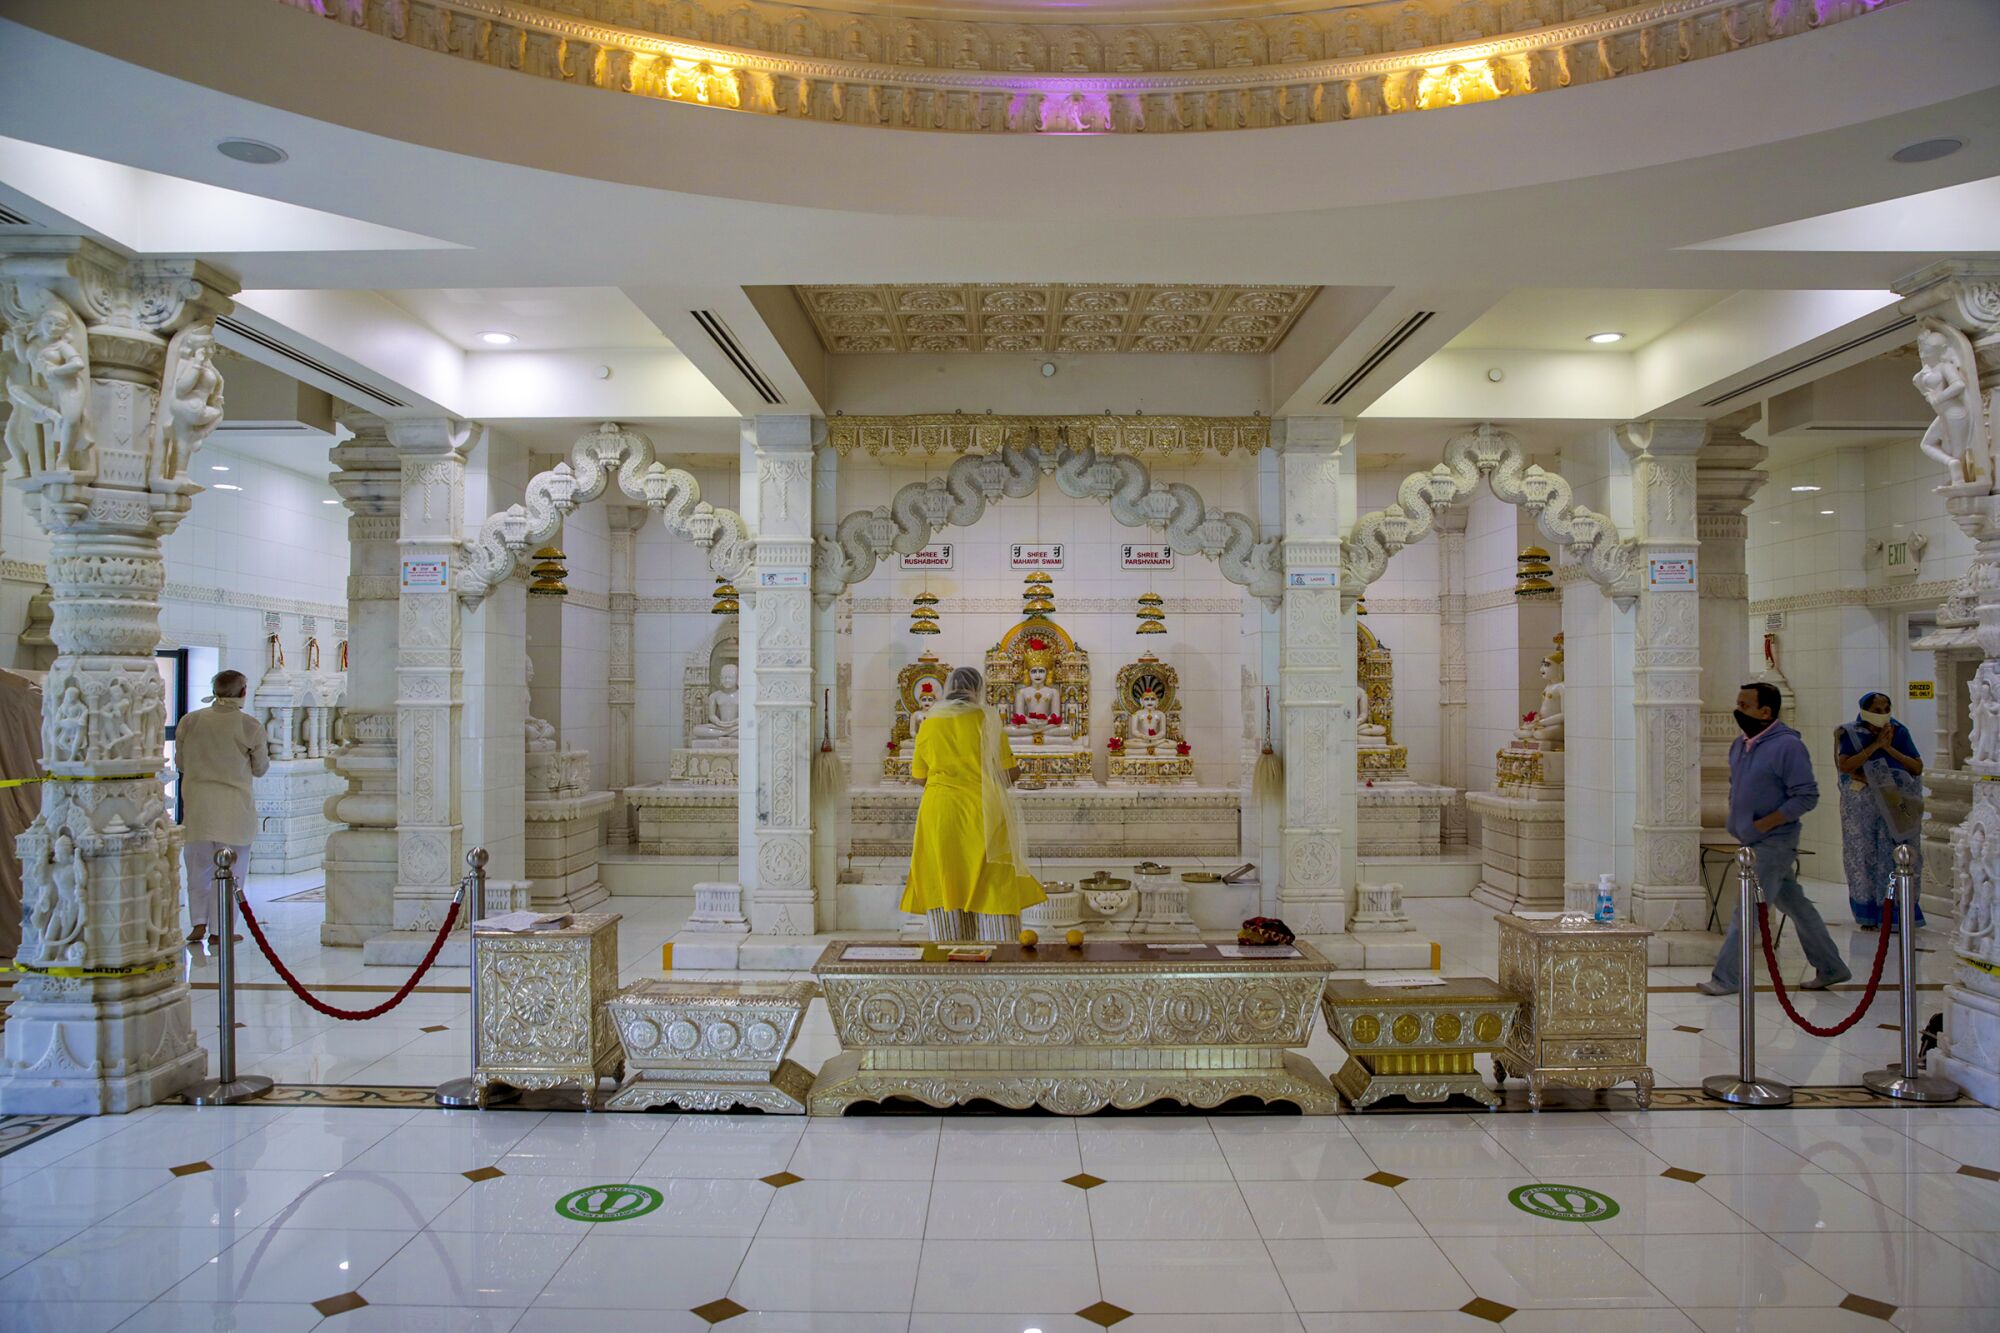 People offer prayers at Jain Center of Southern California.